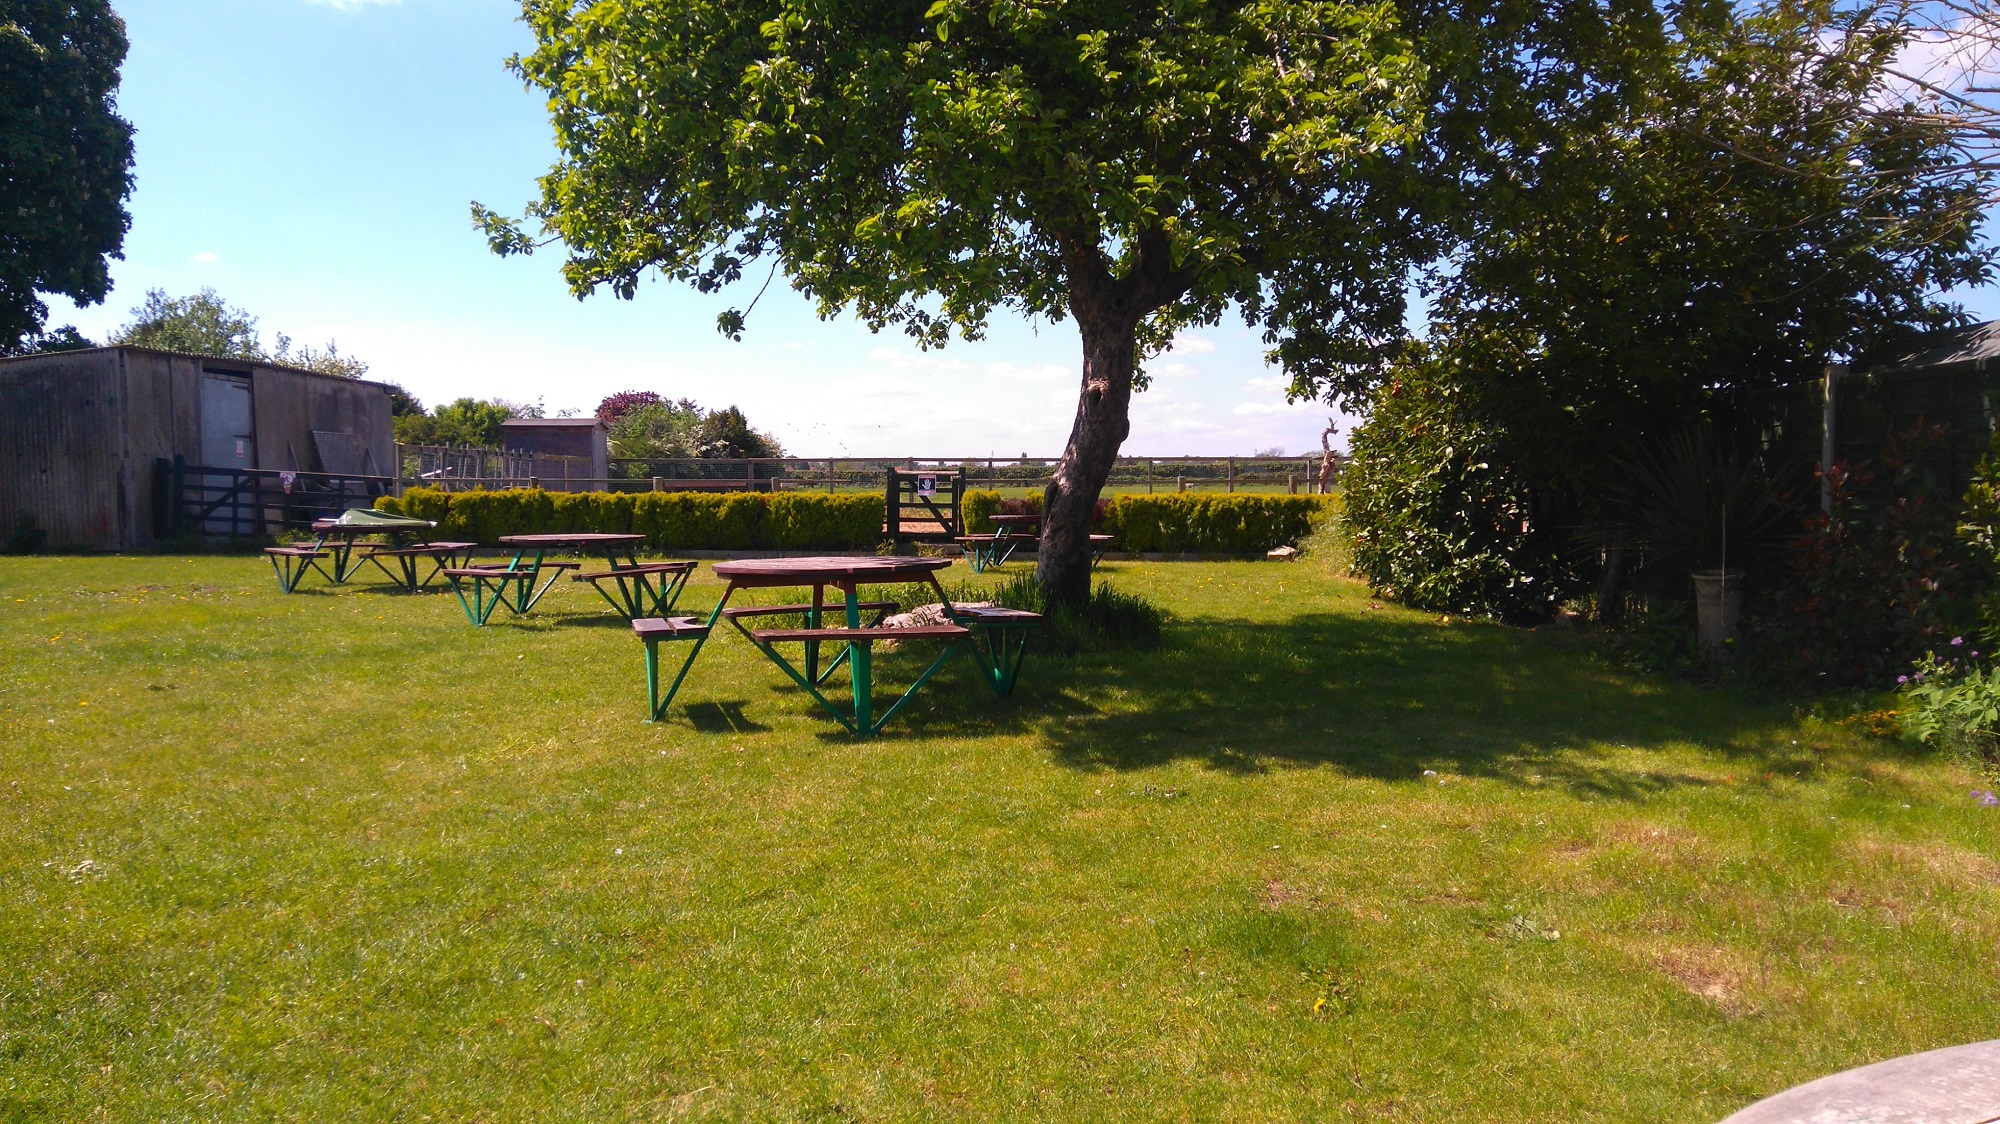 A grassy pub garden on a sunny day, with tables and seats, partly shaded by a tree.